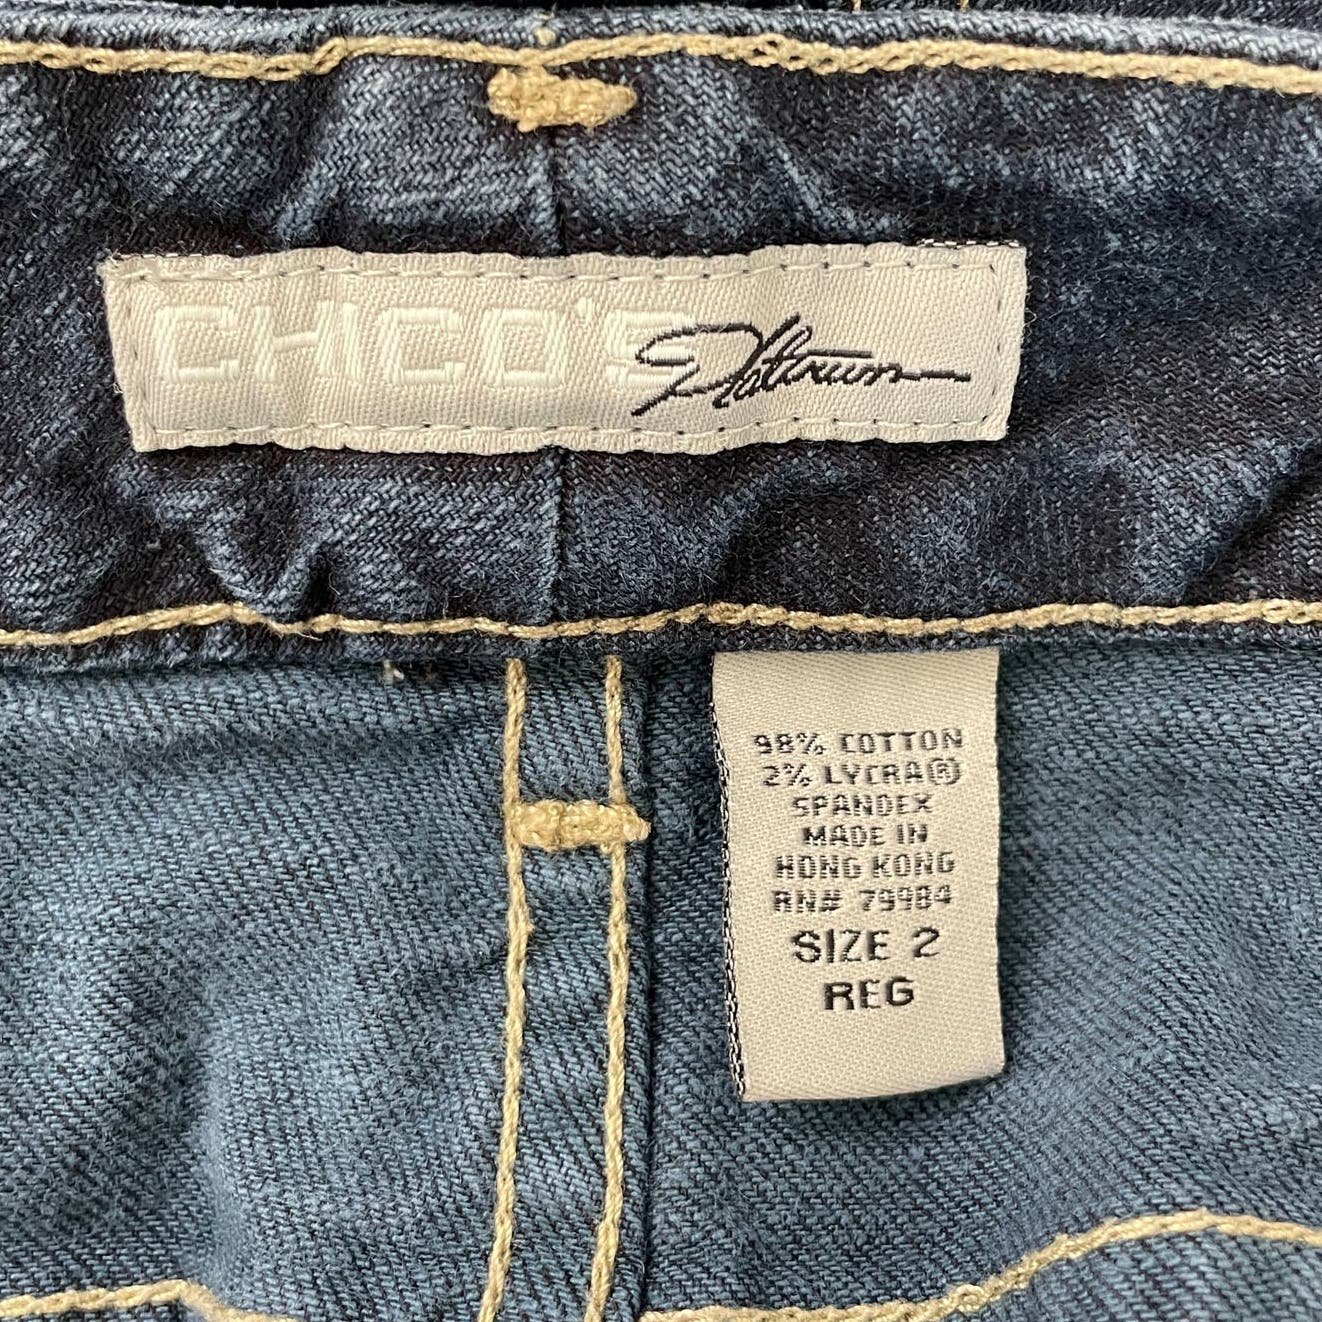 Authentic CHICO´S Platinum Boot Cut Denim Jeans Dark Wash Chico´s Size 2 or US L or 12 fixQBrysH Outlet Store